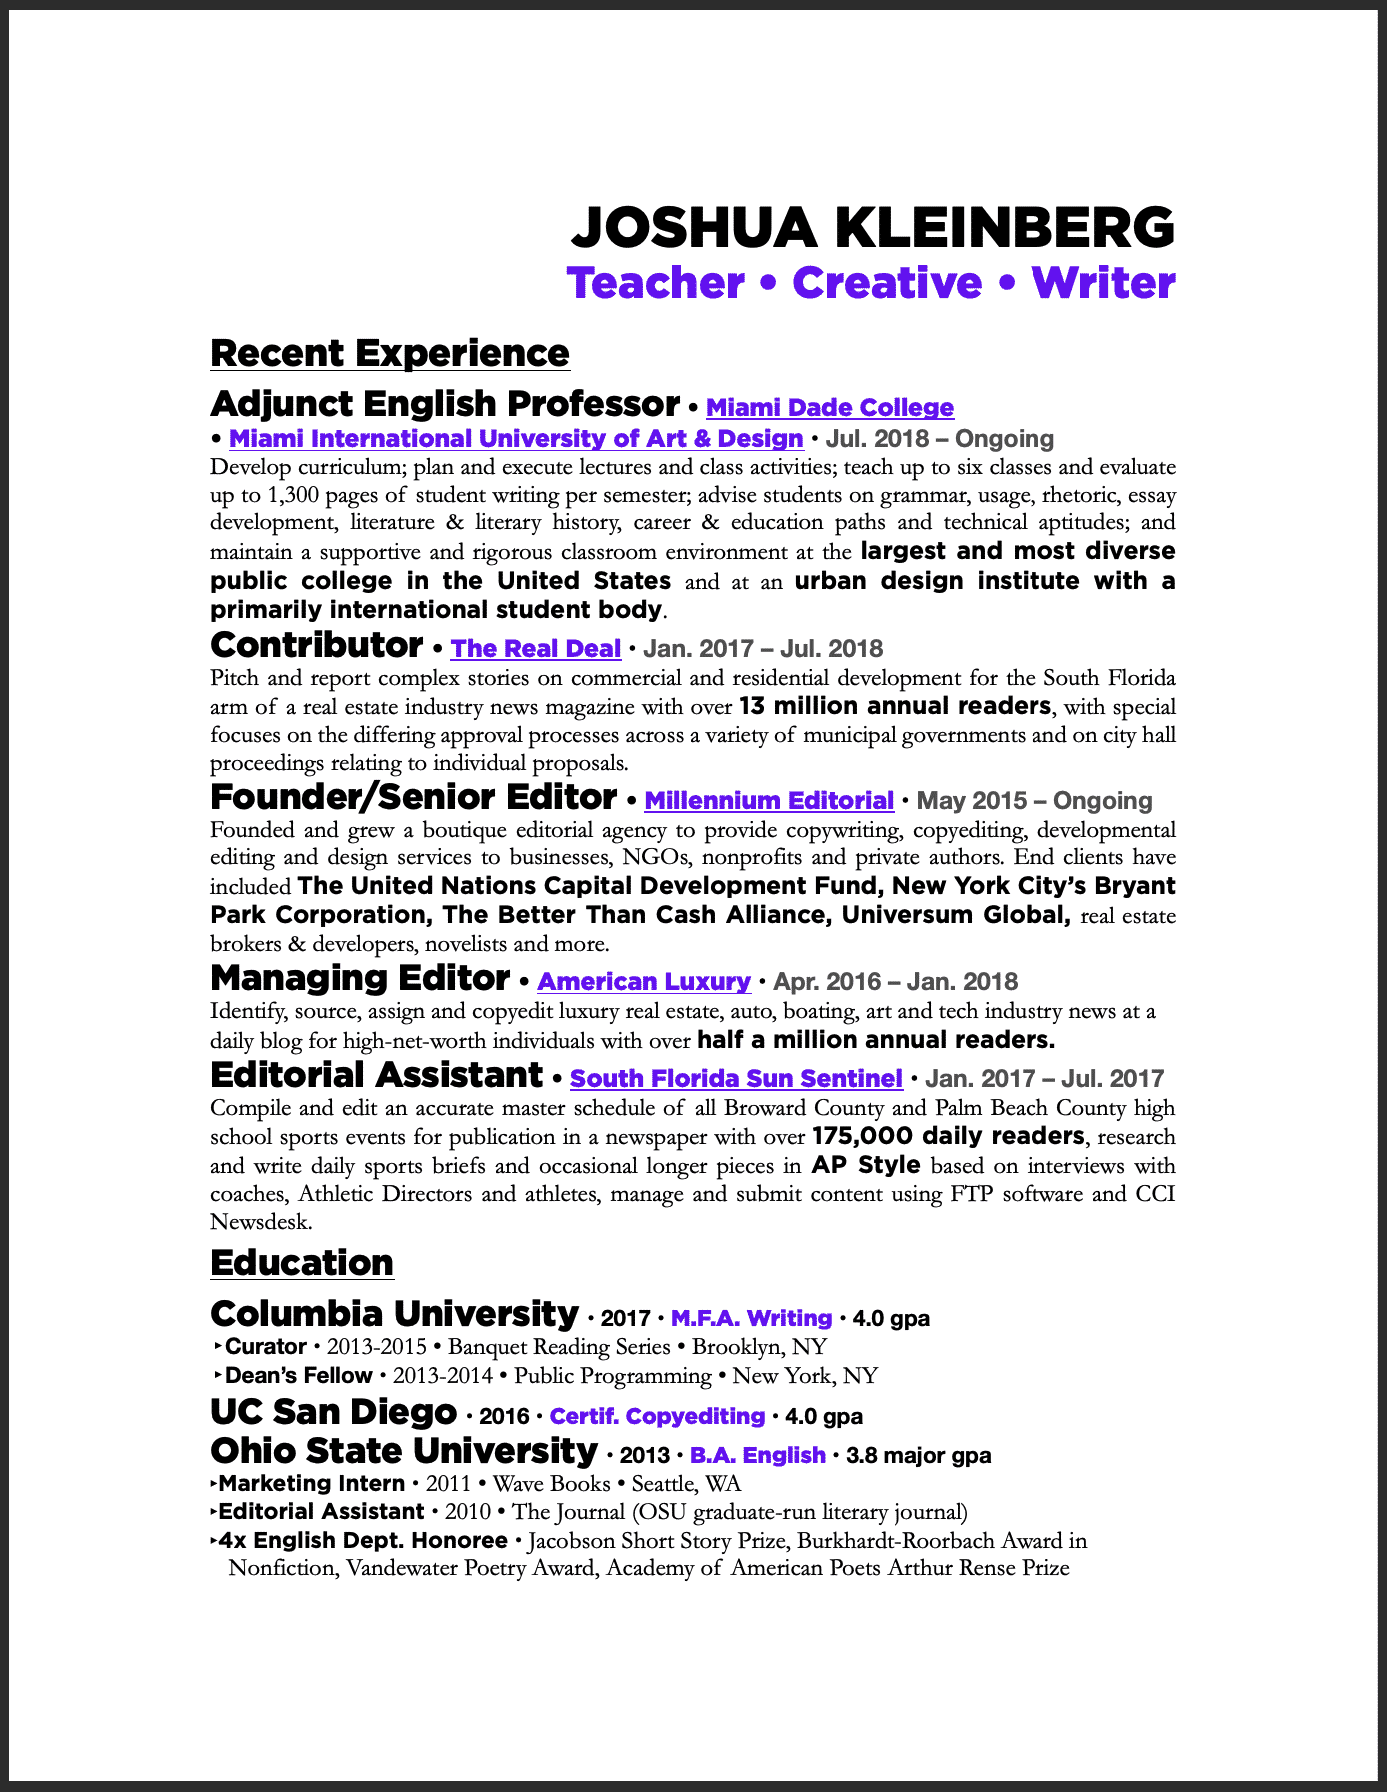 JOSHUA KLEINBERG 
Teacher • Creative • Writer 
 Adjunct English Professor • Miami Dade College 
• Miami International University of Art & Design • Jul. 2018 – Ongoing 
Develop curriculum; plan and execute lectures and class activities; teach up to six classes and evaluate up to 1,300 pages of student writing per semester; advise students on grammar, usage, rhetoric, essay development, literature & literary history, career & education paths and technical aptitudes; and maintain a supportive and rigorous classroom environment at the largest and most diverse public college in the United States and at an urban design institute with a primarily international student body. 
Contributor • The Real Deal • Jan. 2017 – Jul. 2018 
Pitch and report complex stories on commercial and residential development for the South Florida arm of a real estate industry news magazine with over 13 million annual readers, with special focuses on the differing approval processes across a variety of municipal governments and on city hall proceedings relating to individual proposals. 
Founder/Senior Editor • Millennium Editorial • May 2015 – Ongoing  Founded and grew a boutique editorial agency to provide copywriting, copyediting, developmental editing and design services to businesses, NGOs, nonprofits and private authors. End clients have included The United Nations Capital Development Fund, New York City’s Bryant Park Corporation, The Better Than Cash Alliance, Universum Global, real estate brokers & developers, novelists and more. 
Managing Editor • American Luxury • Apr. 2016 – Jan. 2018 
Identify, source, assign and copyedit luxury real estate, auto, boating, art and tech industry news at a daily blog for high-net-worth individuals with over half a million annual readers. 
Editorial Assistant • South Florida Sun Sentinel • Jan. 2017 – Jul. 2017 Compile and edit an accurate master schedule of all Broward County and Palm Beach County high school sports events for publication in a newspaper with over 175,000 daily readers, research and write daily sports briefs and occasional longer pieces in AP Style based on interviews with coaches, Athletic Directors and athletes, manage and submit content using FTP software and CCI Newsdesk. 
Education 
Columbia University • 2017 • M.F.A. Writing • 4.0 gpa ‣ Curator • 2013-2015 • Banquet Reading Series • Brooklyn, NY 
‣ Dean’s Fellow • 2013-2014 • Public Programming • New York, NY 
UC San Diego • 2016 • Certif. Copyediting • 4.0 gpa 
Ohio State University • 2013 • B.A. English • 3.8 major gpa ‣ Marketing Intern • 2011 • Wave Books • Seattle, WA 
‣ Editorial Assistant • 2010 • The Journal (OSU graduate-run literary journal) 
‣ 4x English Dept. Honoree • Jacobson Short Story Prize, Burkhardt-Roorbach Award in
Nonfiction, Vandewater Poetry Award, Academy of American Poets Arthur Rense Prize